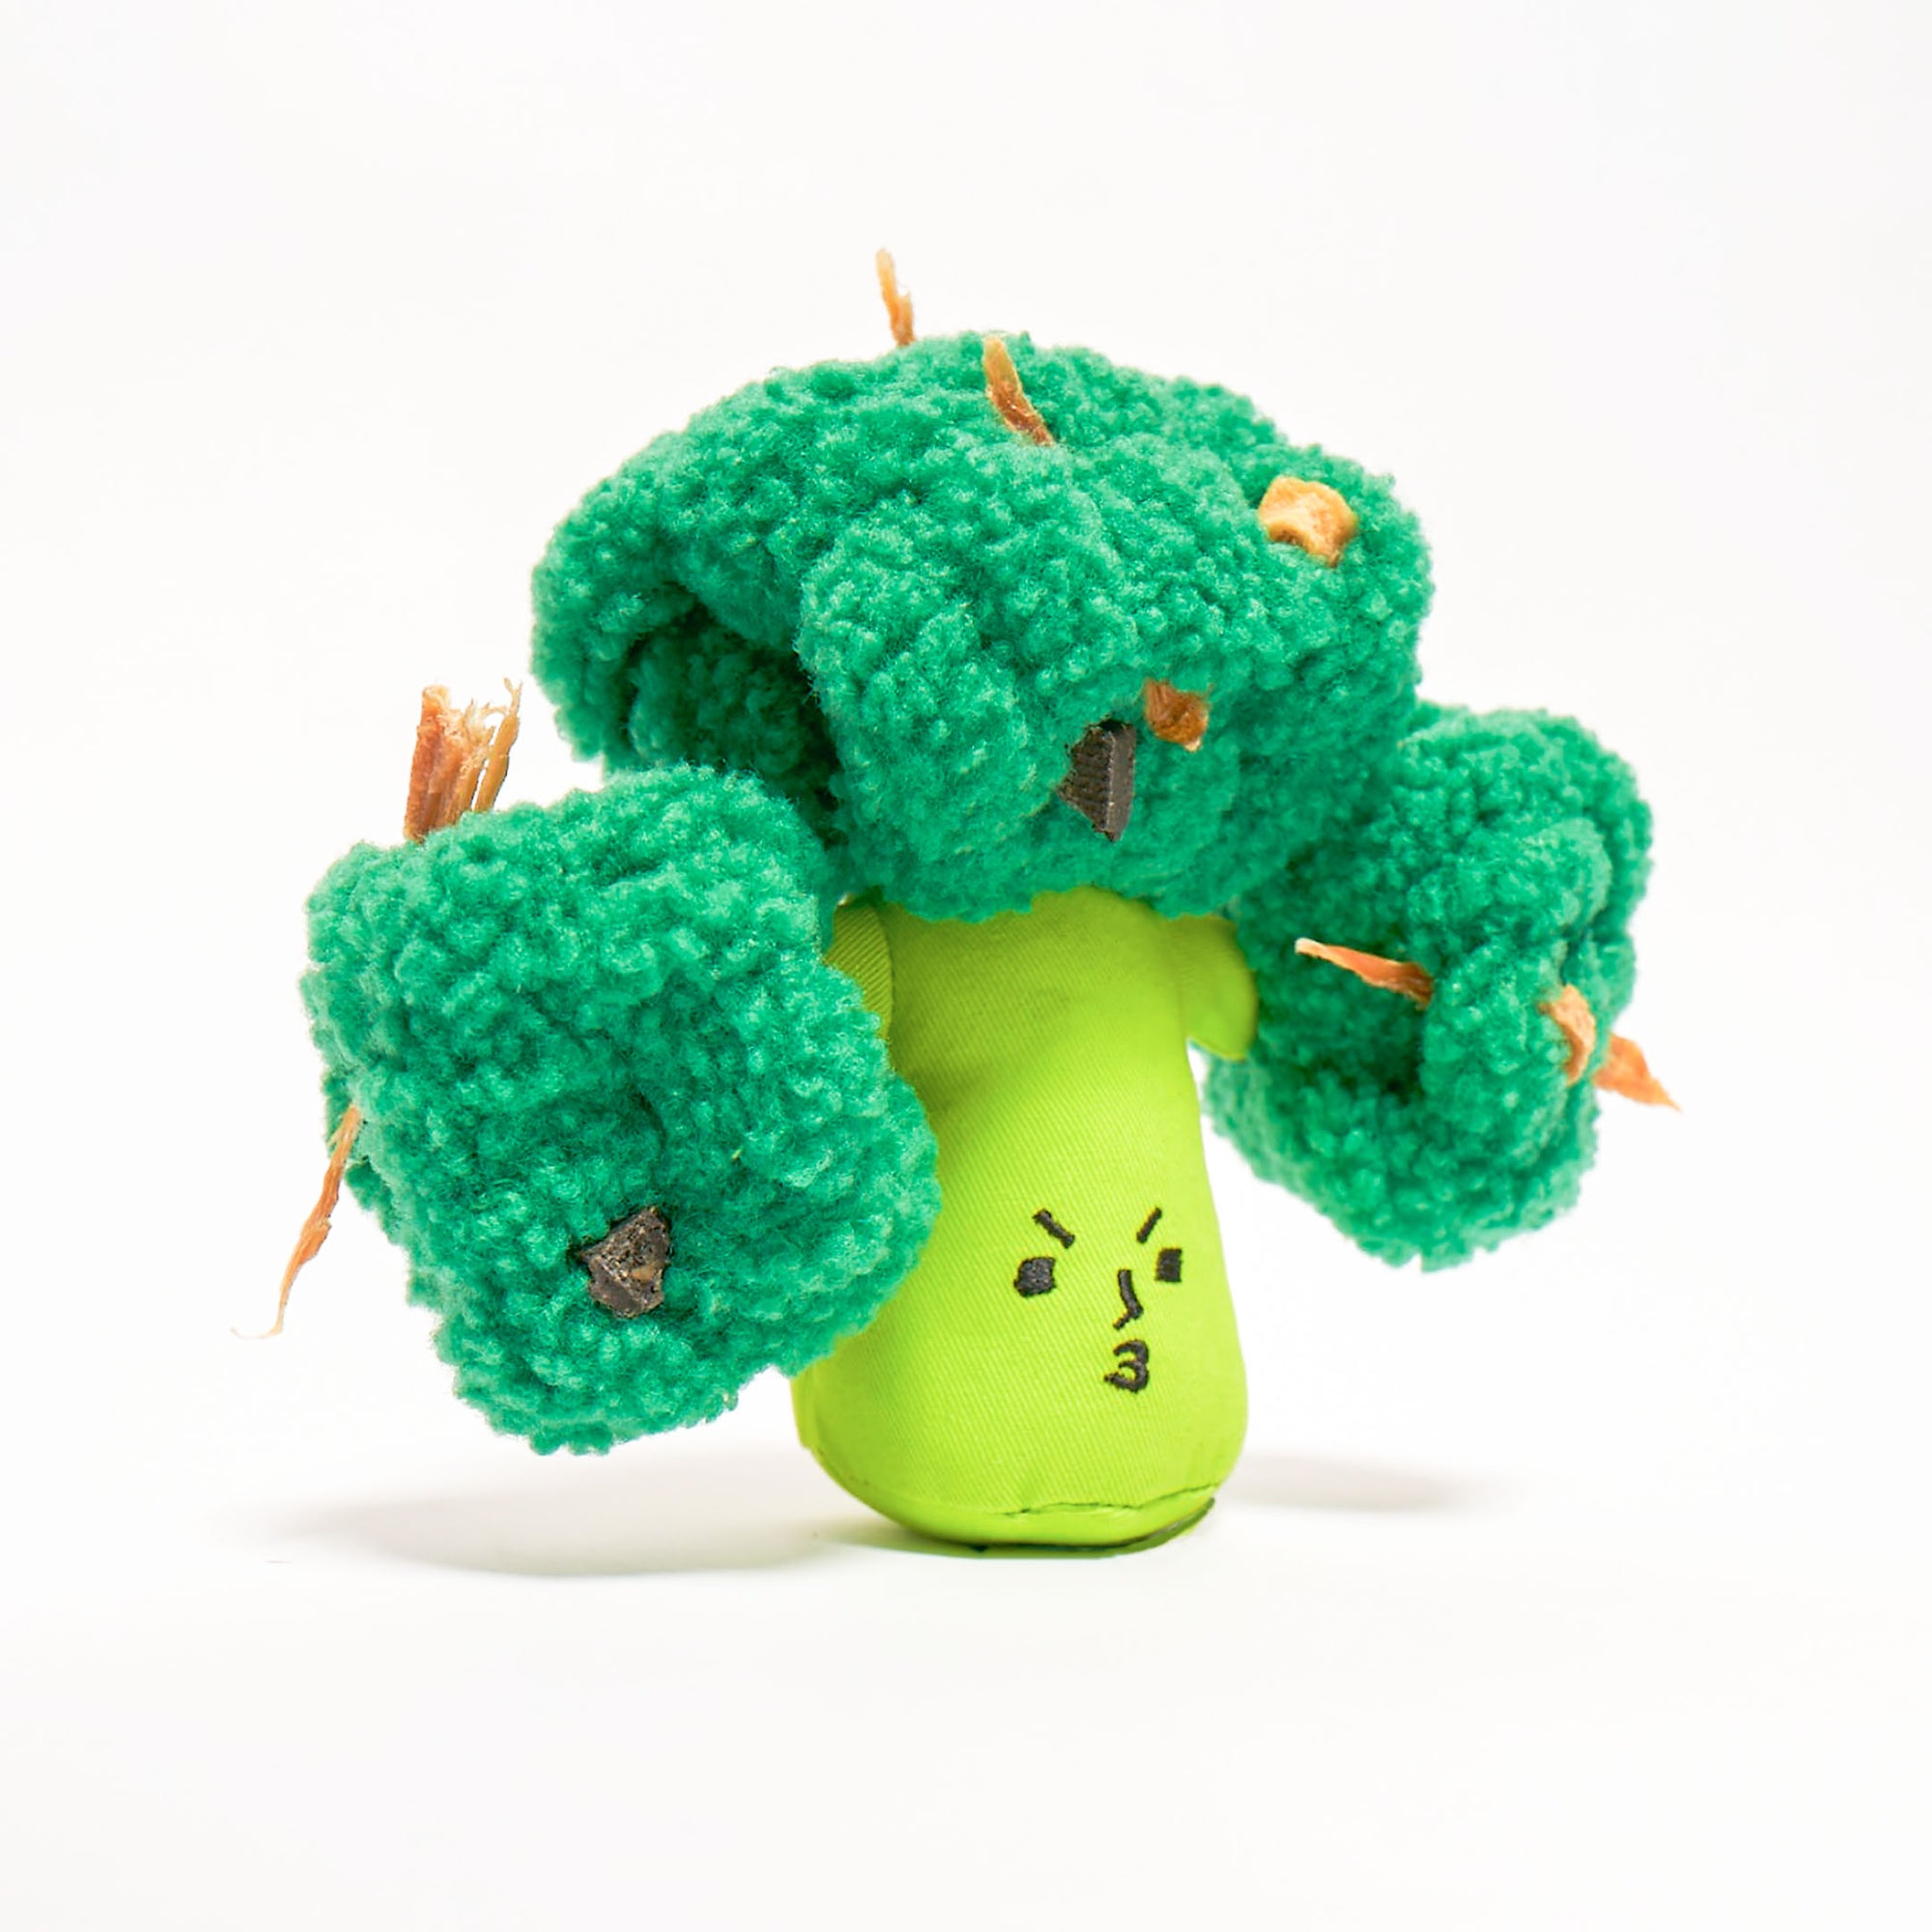 The image displays a dog nosework toy designed to look like a piece of broccoli, with a cheerful face on the green top. The toy’s green sections likely have pockets or compartments where treats can be hidden to encourage a dog’s natural foraging instincts. The texture of the toy is visually similar to broccoli florets, adding to its playful appearance. The white background highlights the toy's vibrant color and intricate details, making it an attractive accessory for pet enrichment activities.